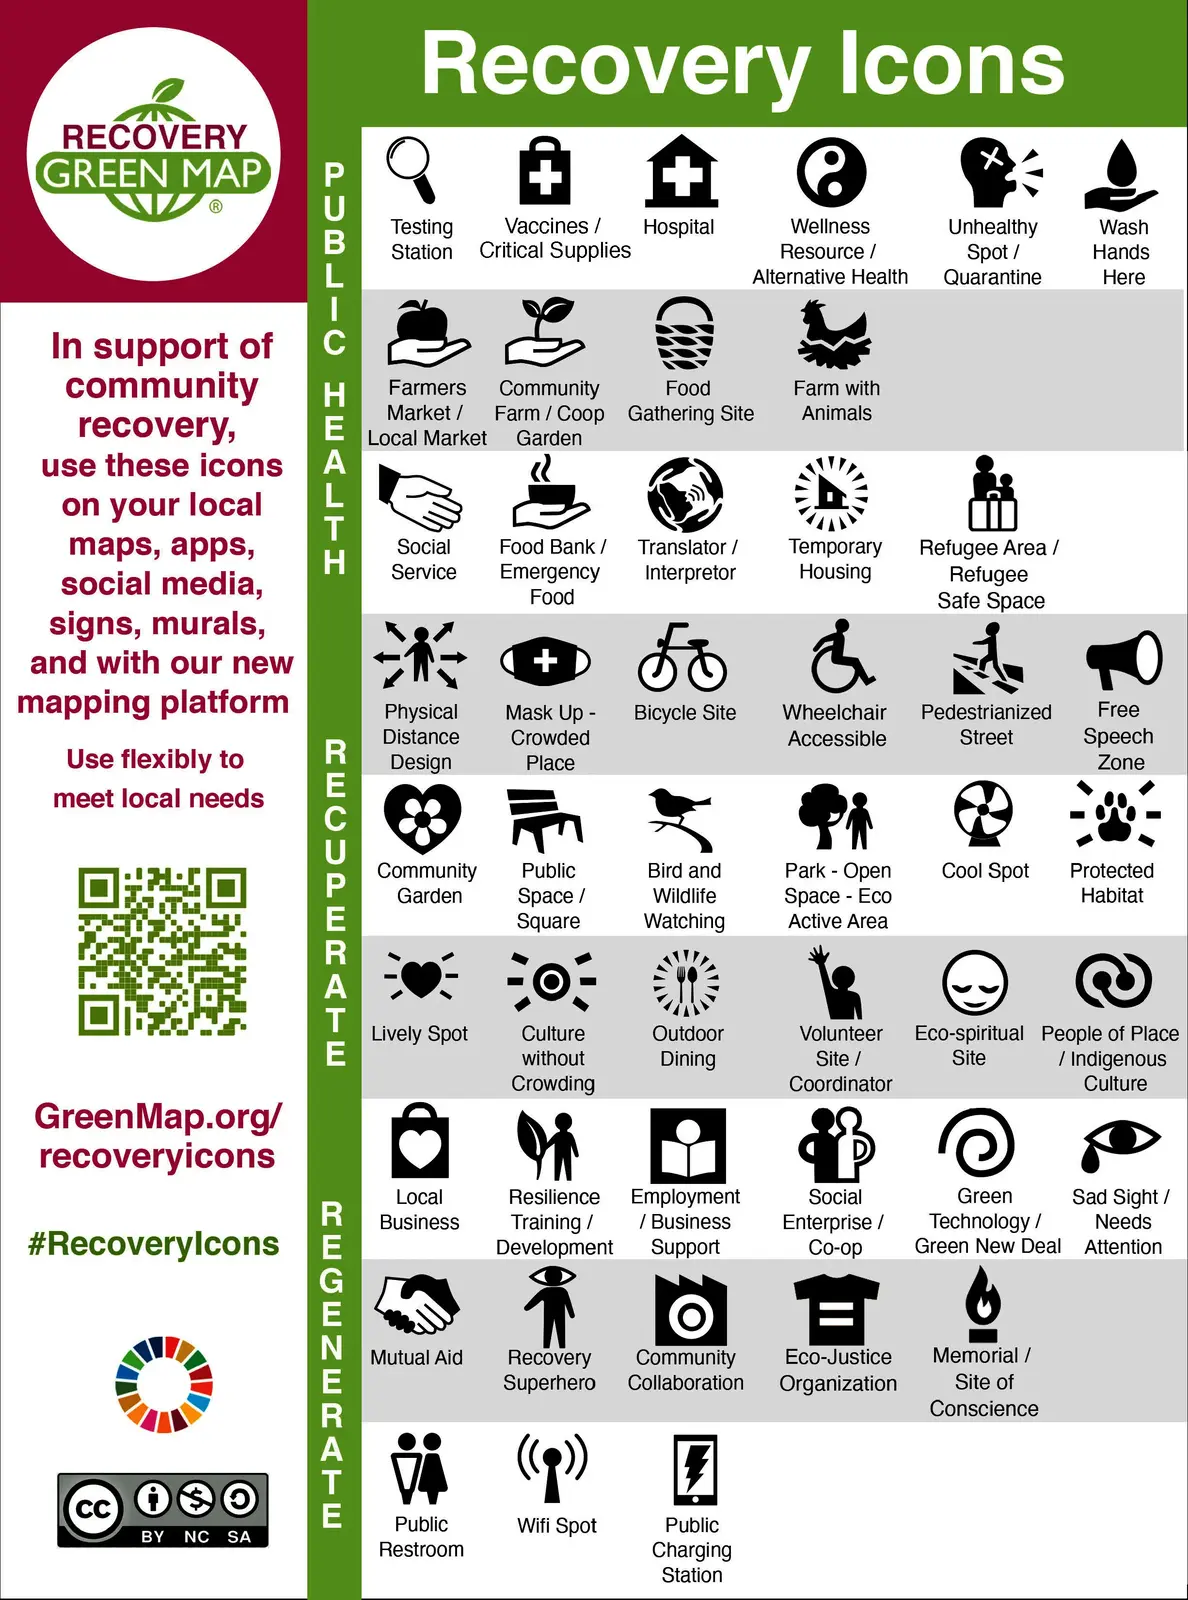 Recovery Icons - the full set on public health, recuperation, and regeneration